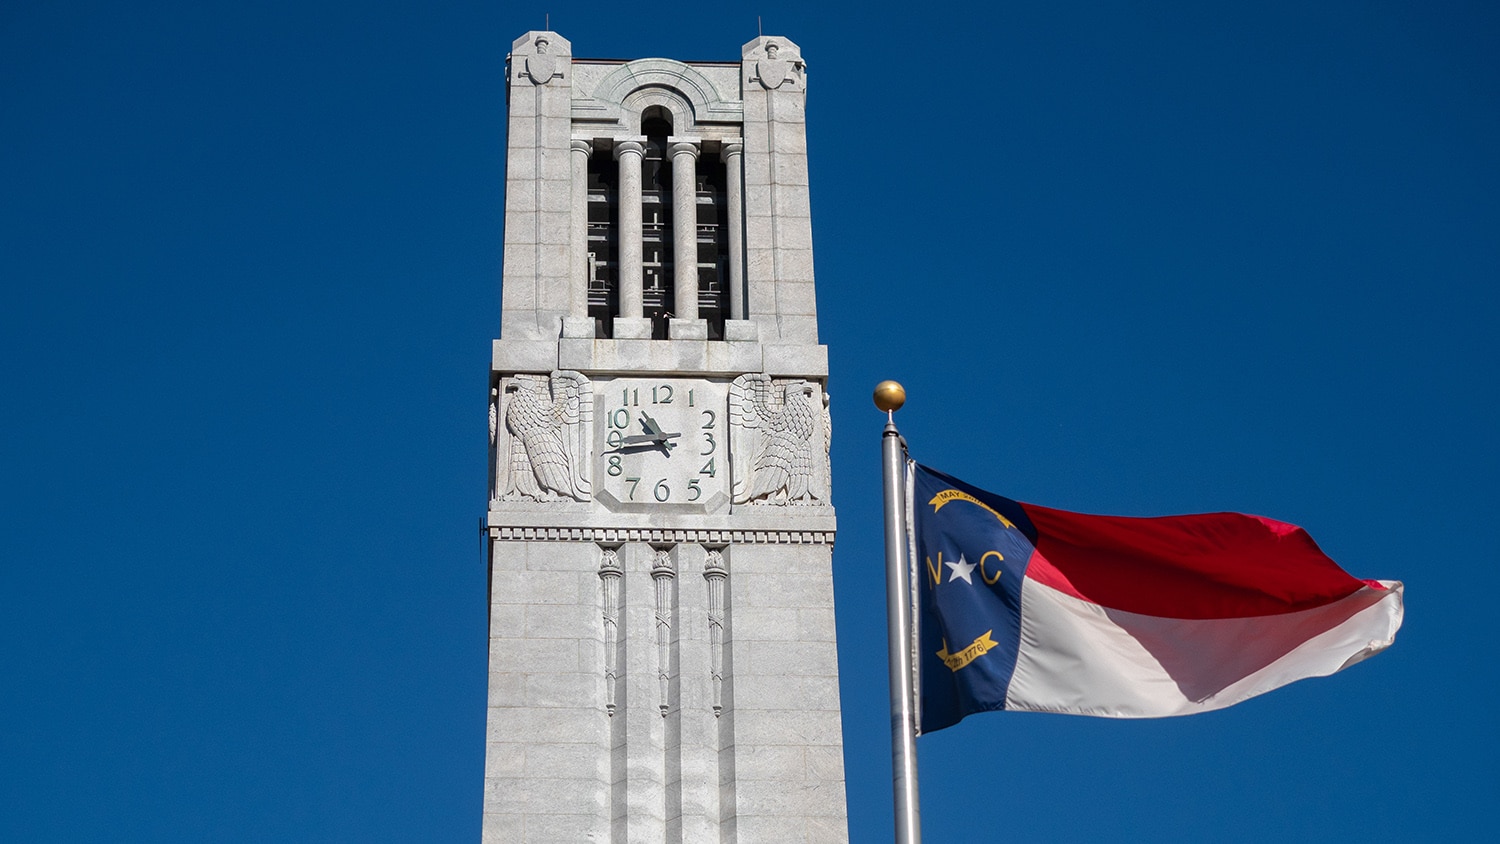 The state flag flies in front of the NC&#160;State Memorial Belltower on a fall morning.